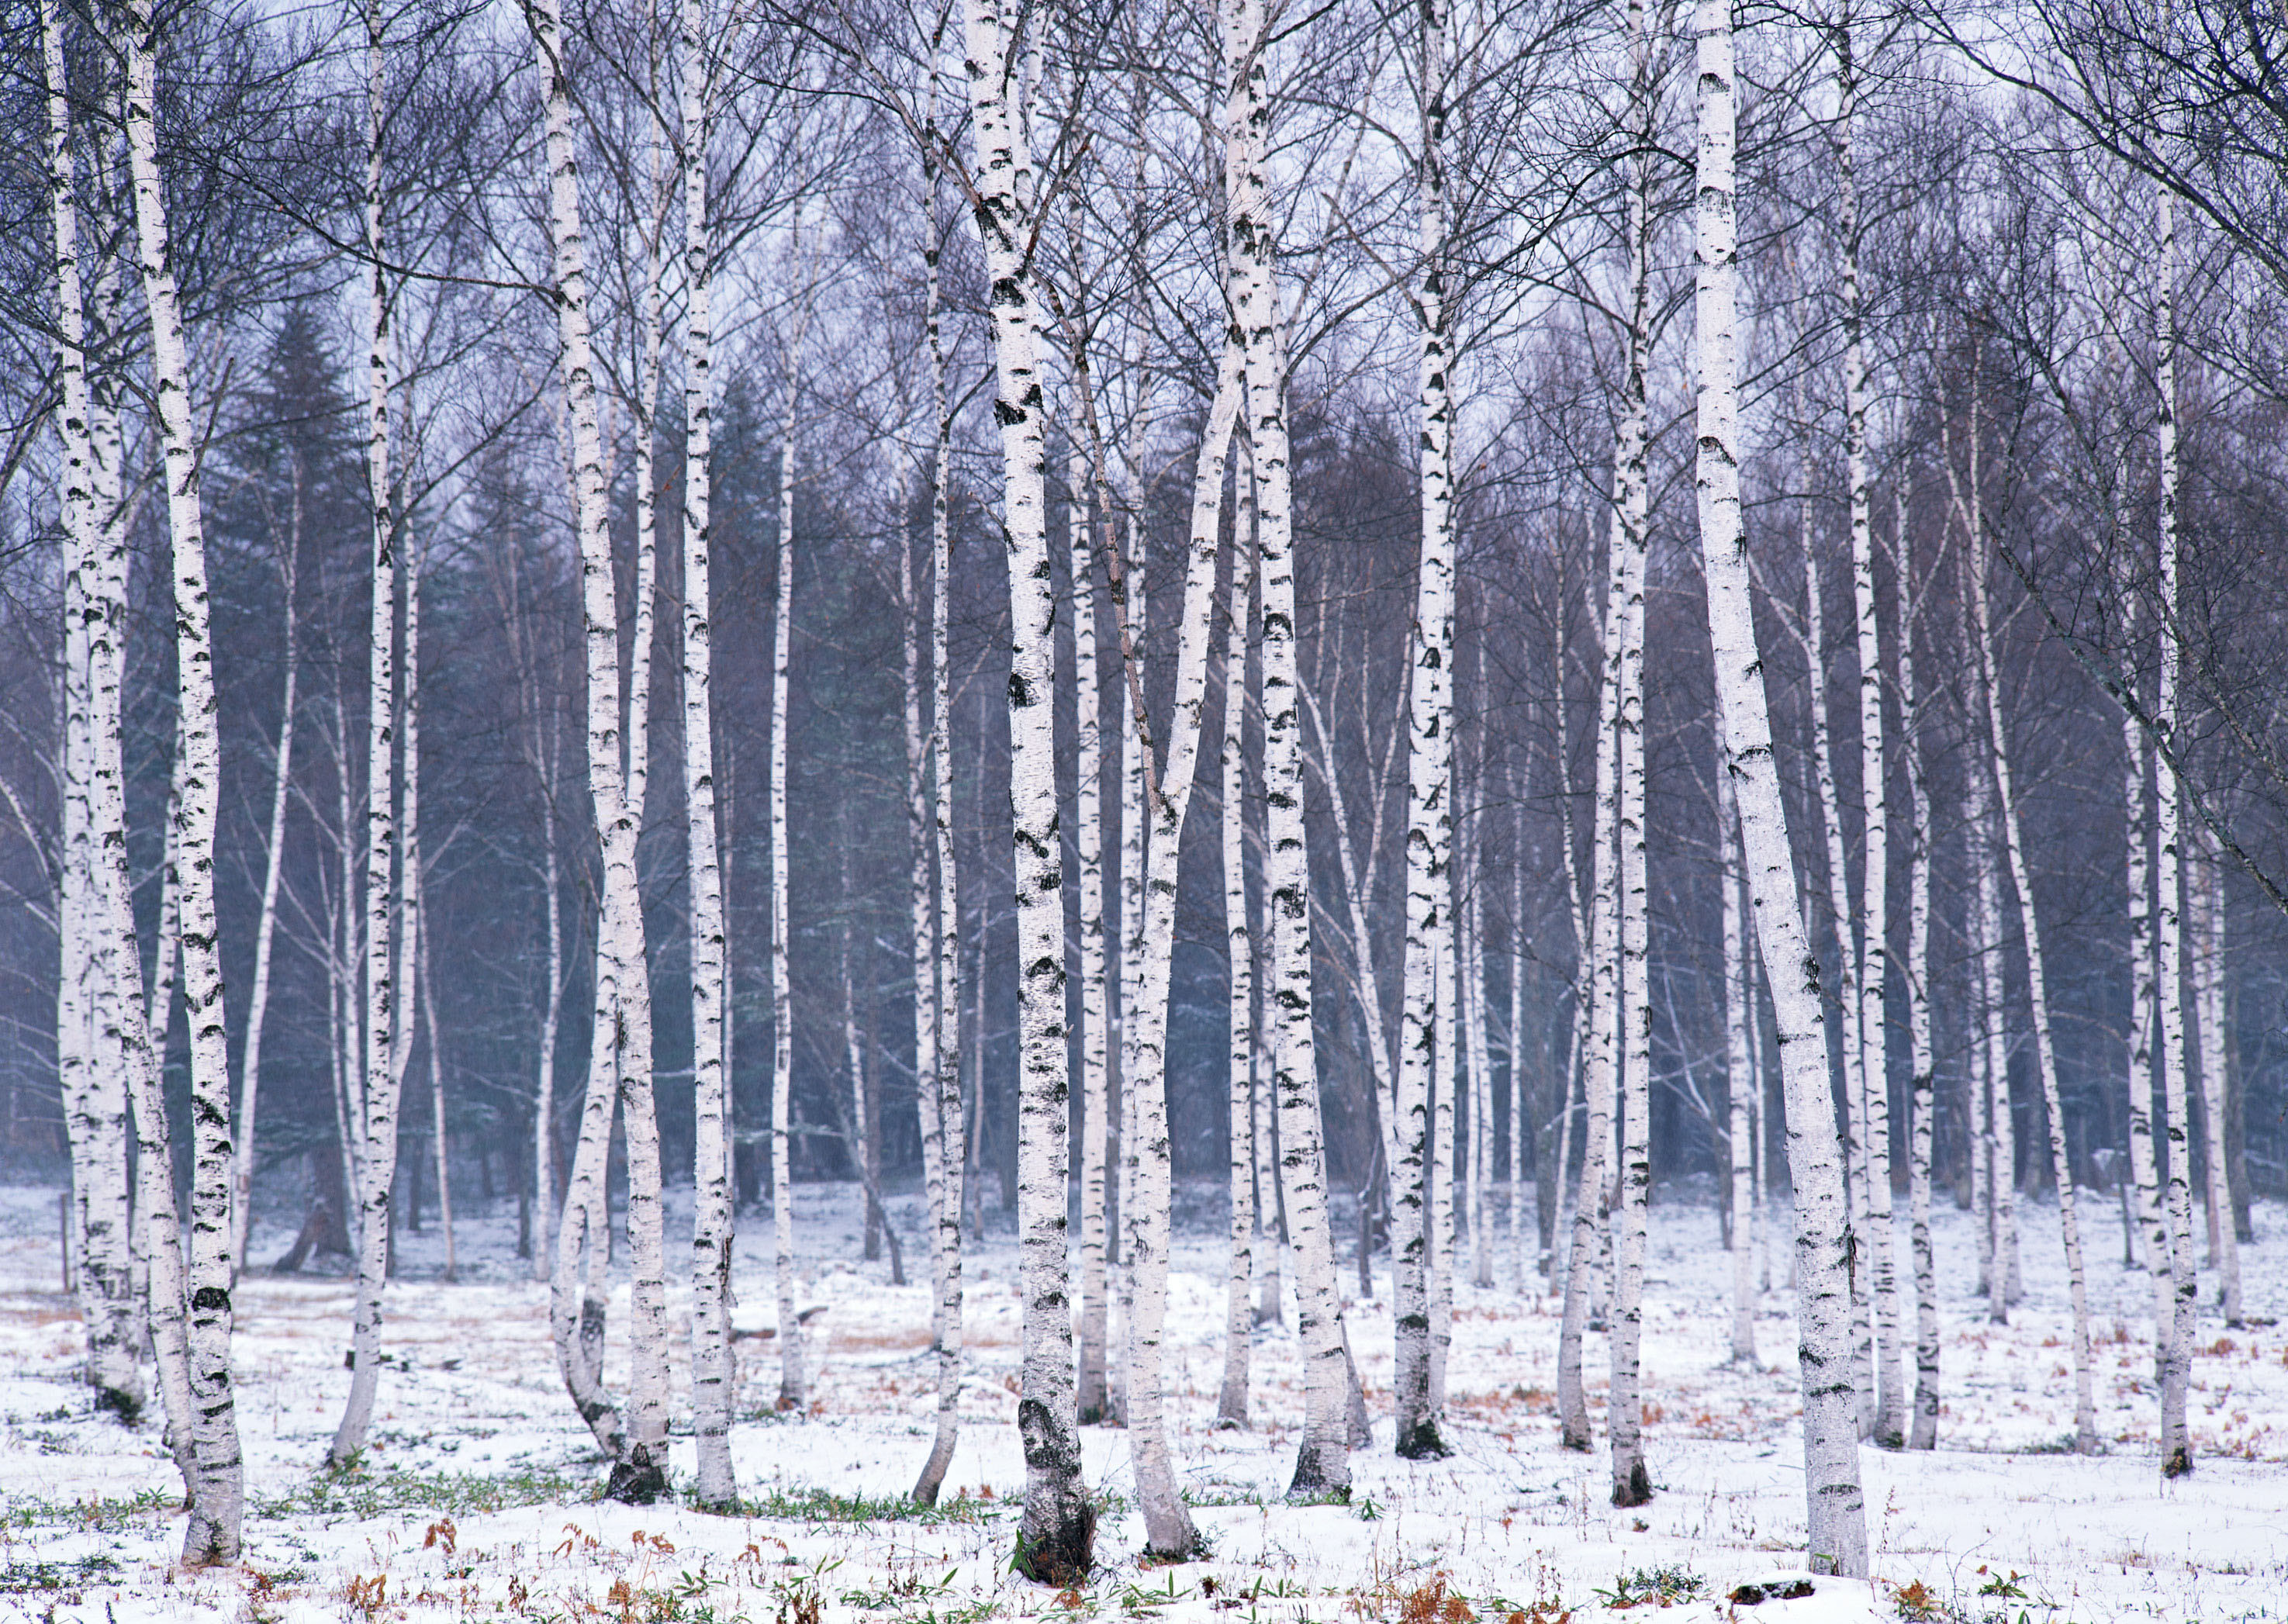 So These Are The Birch Tree Wallpaper That You Can Use As Your